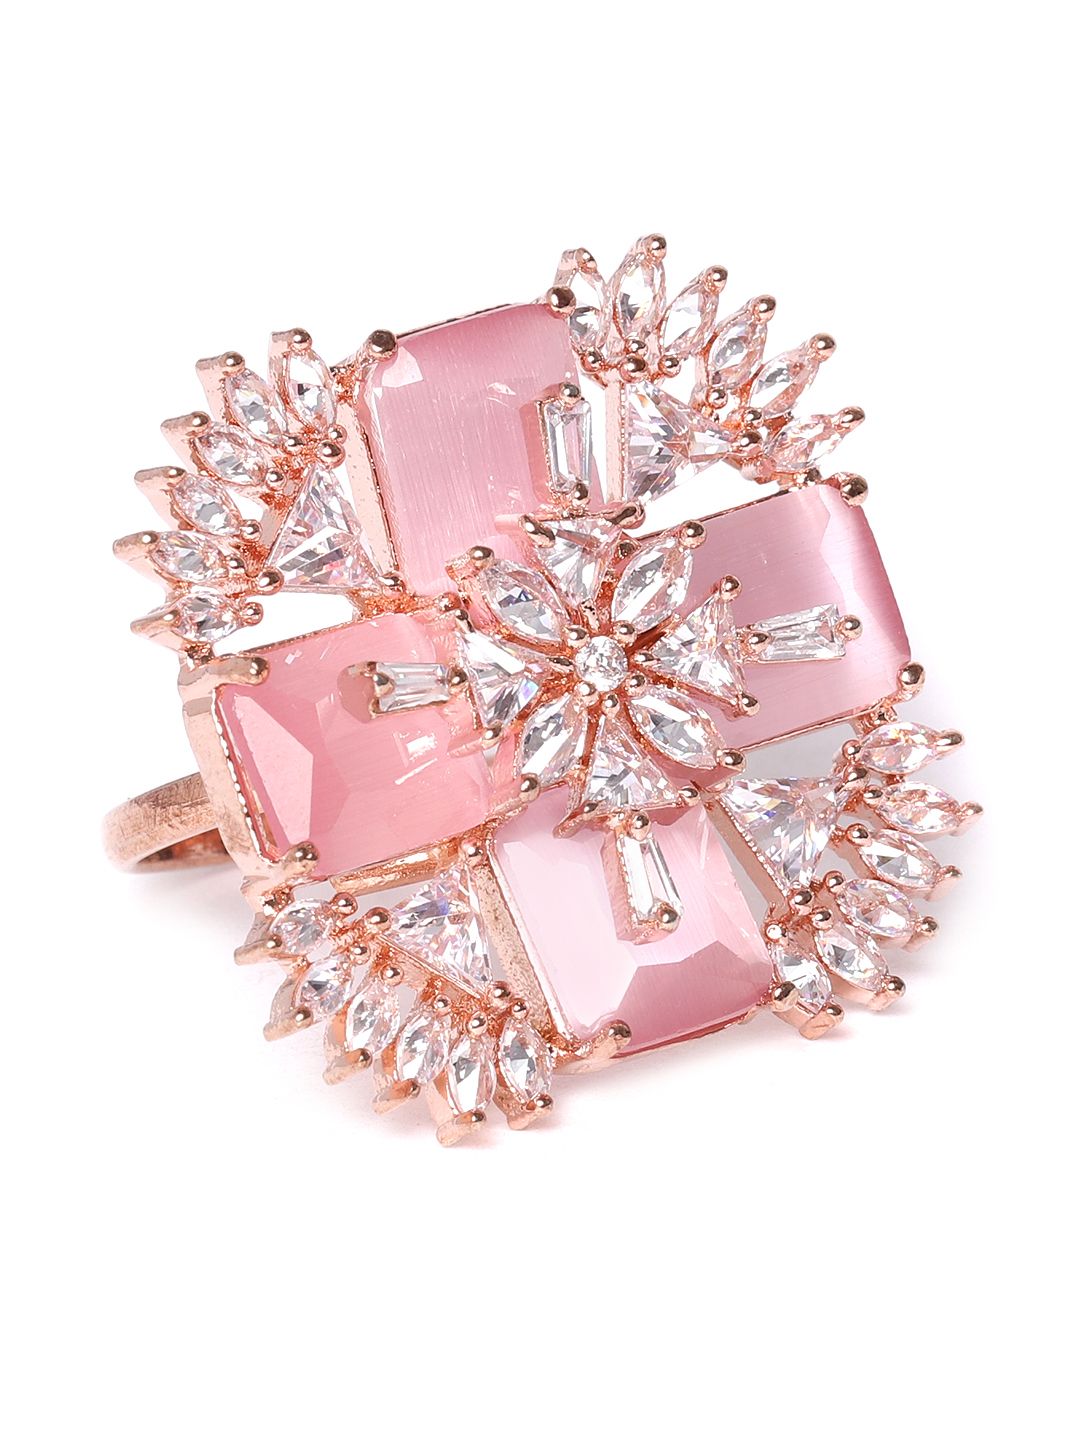 JEWELS GEHNA Pink Rose Gold-Plated AD-Studded Handcrafted Adjustable Finger Ring Price in India